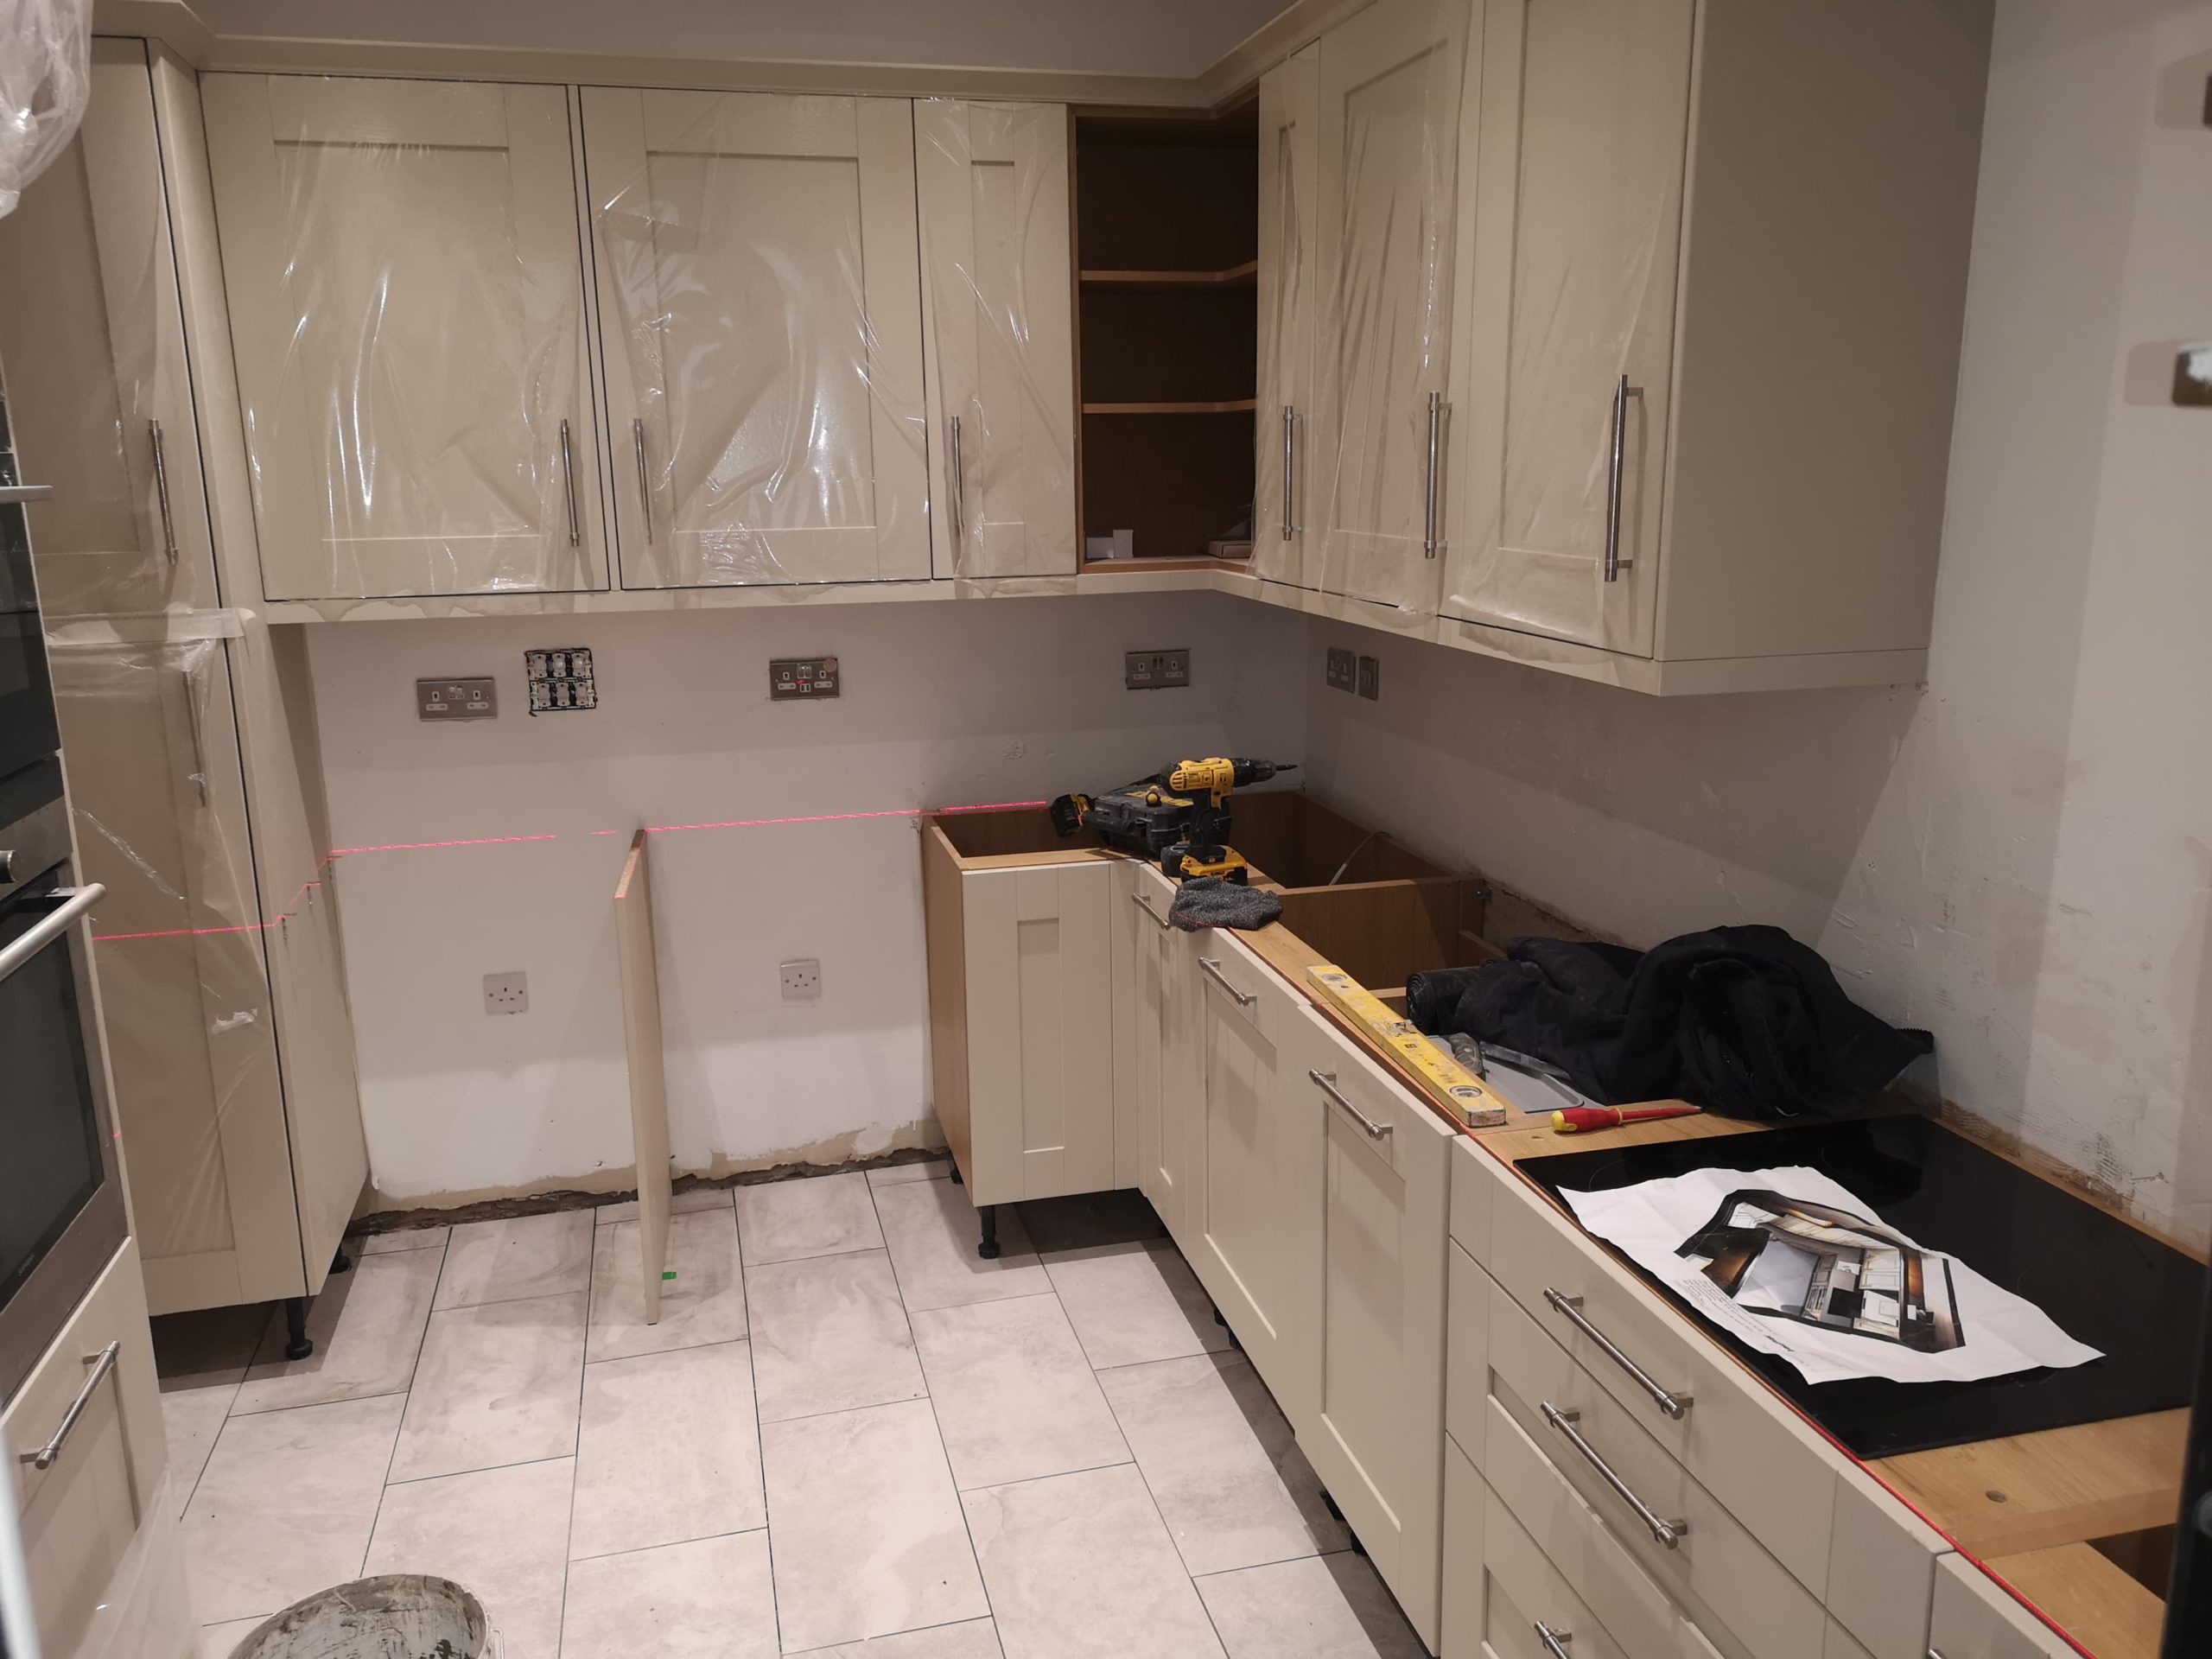 Kitchen Installations in Bexley - Deal Installations and Maintenance Ltd.